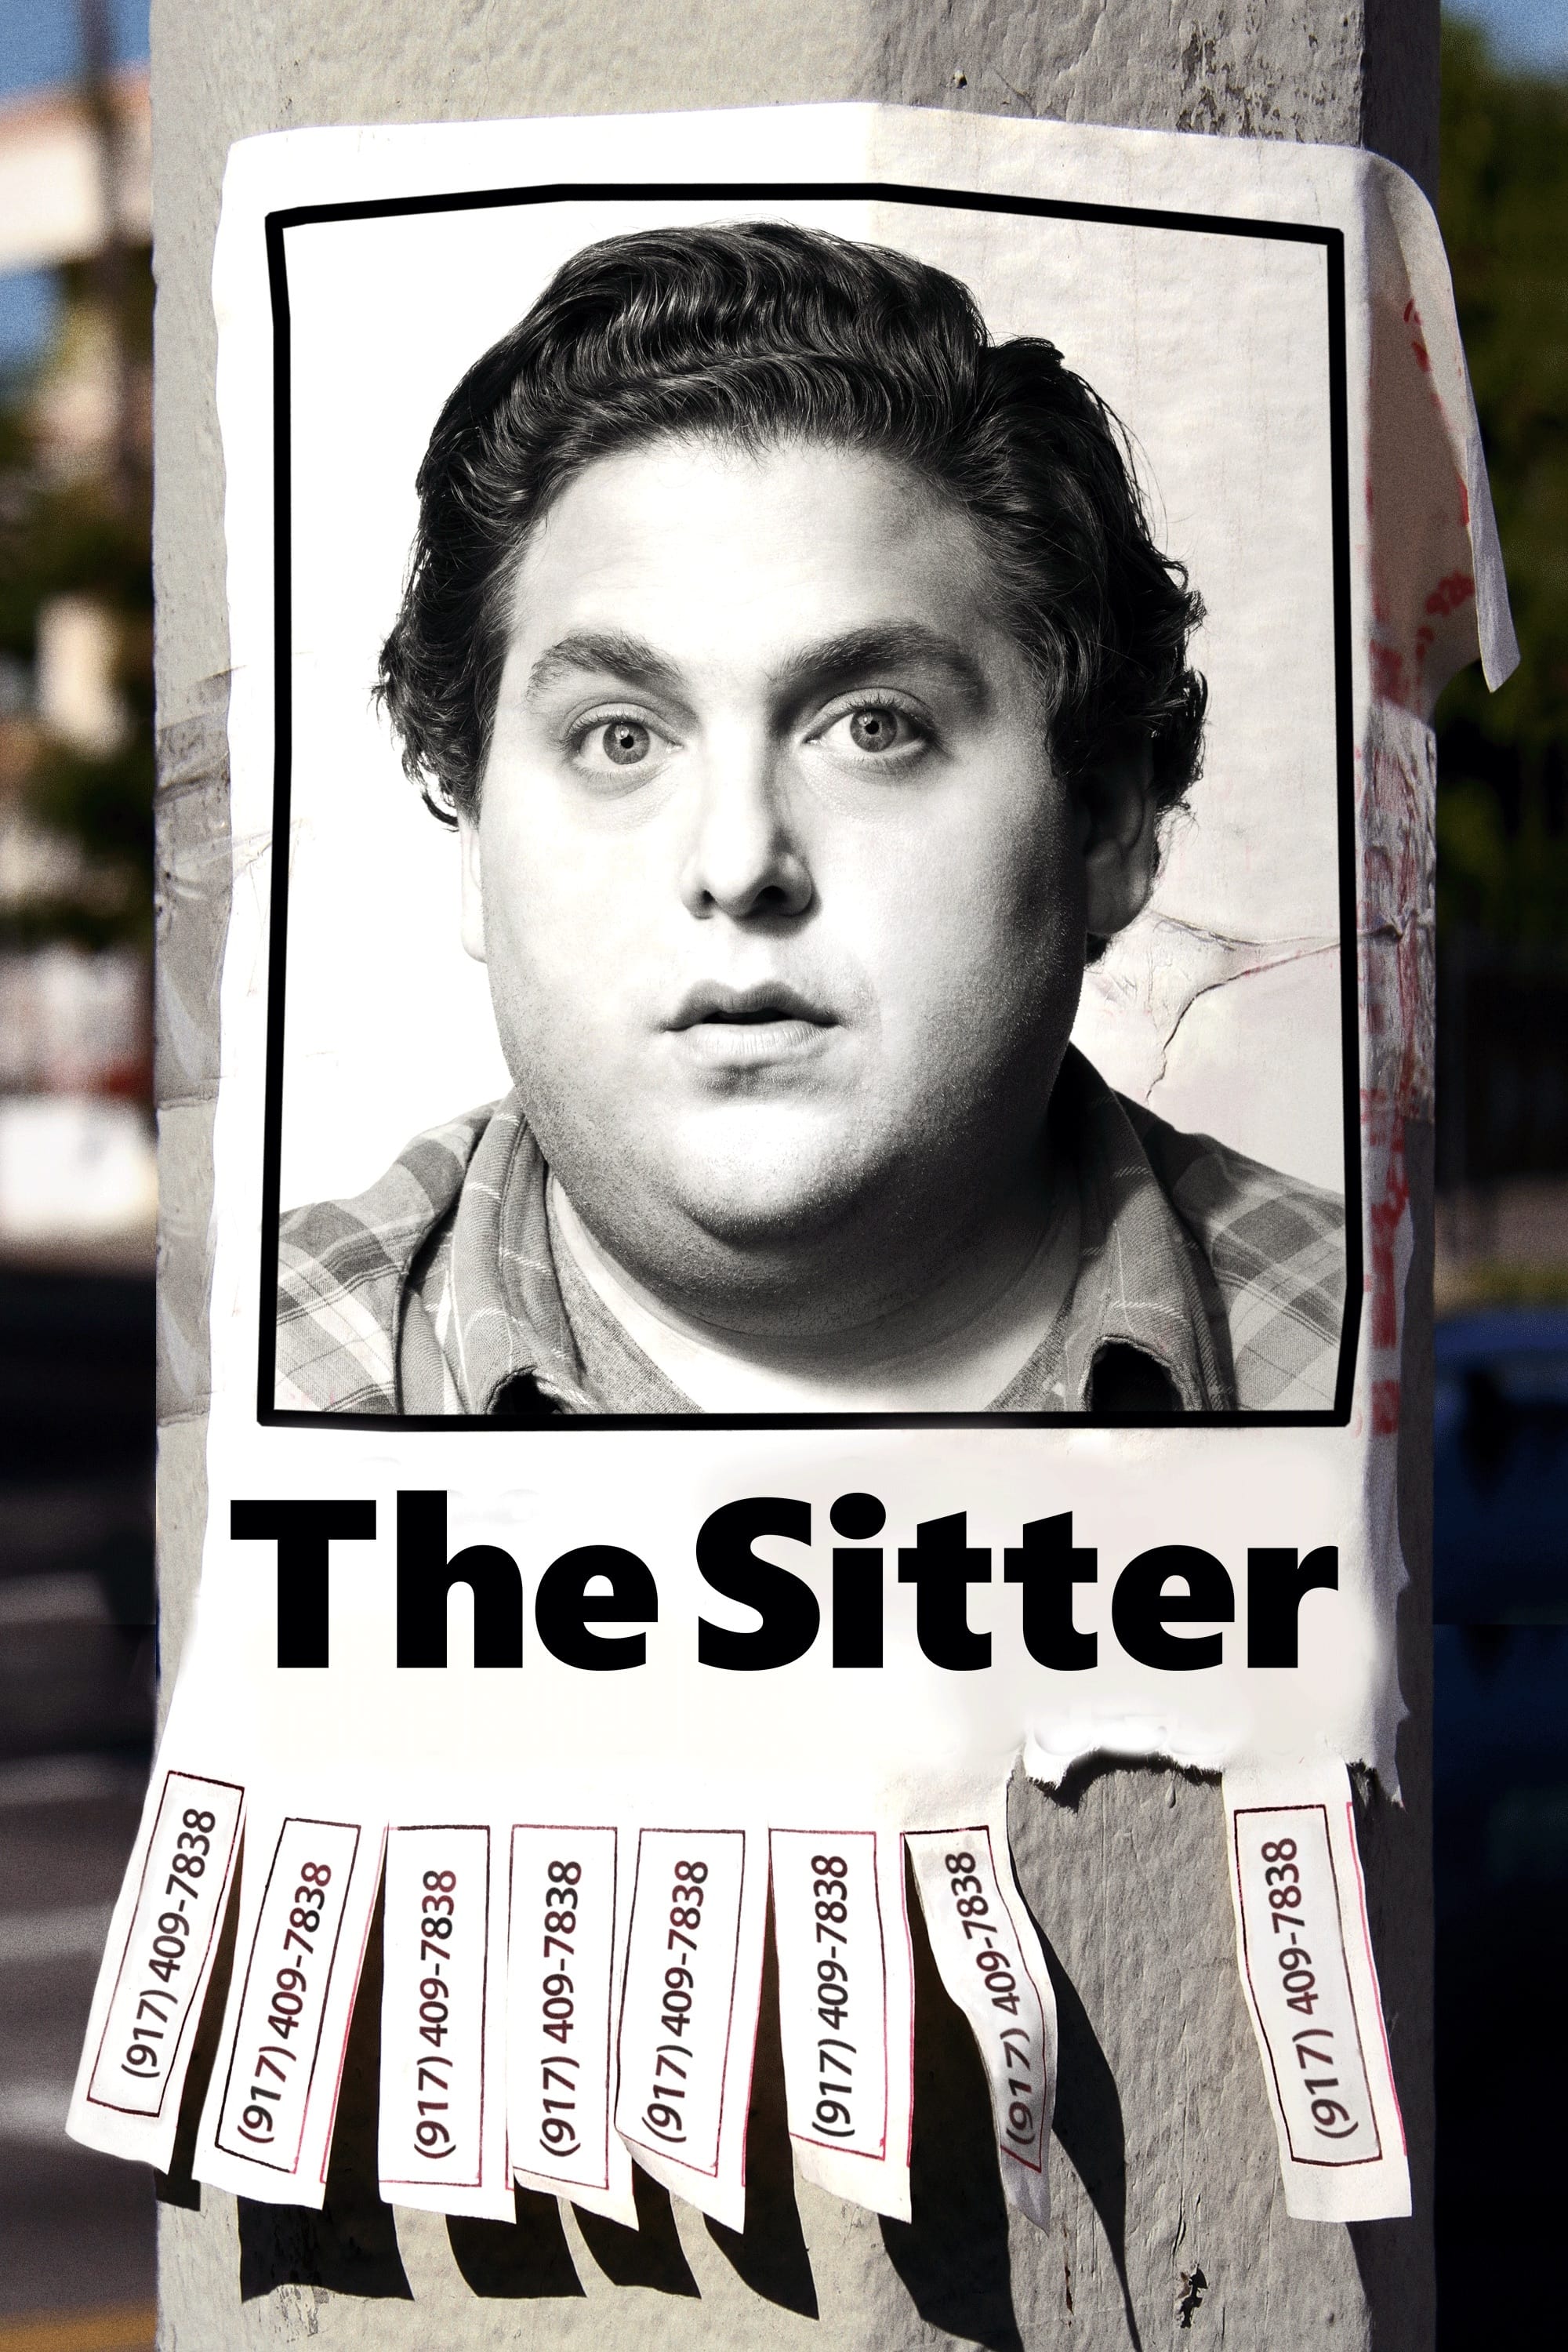 The Sitter (2011)